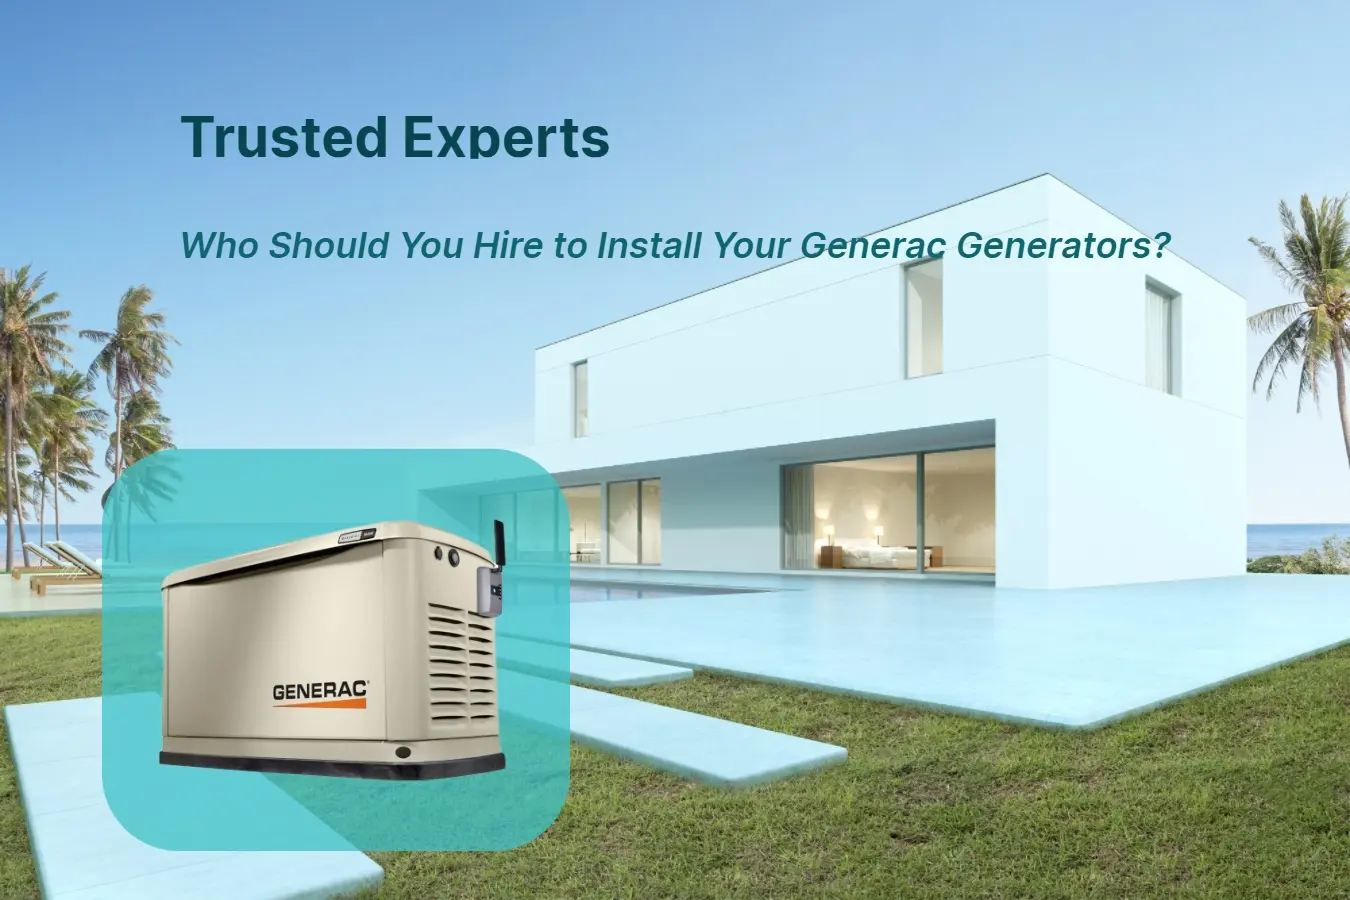 Who Should You Hire to Install Your Generac Generators